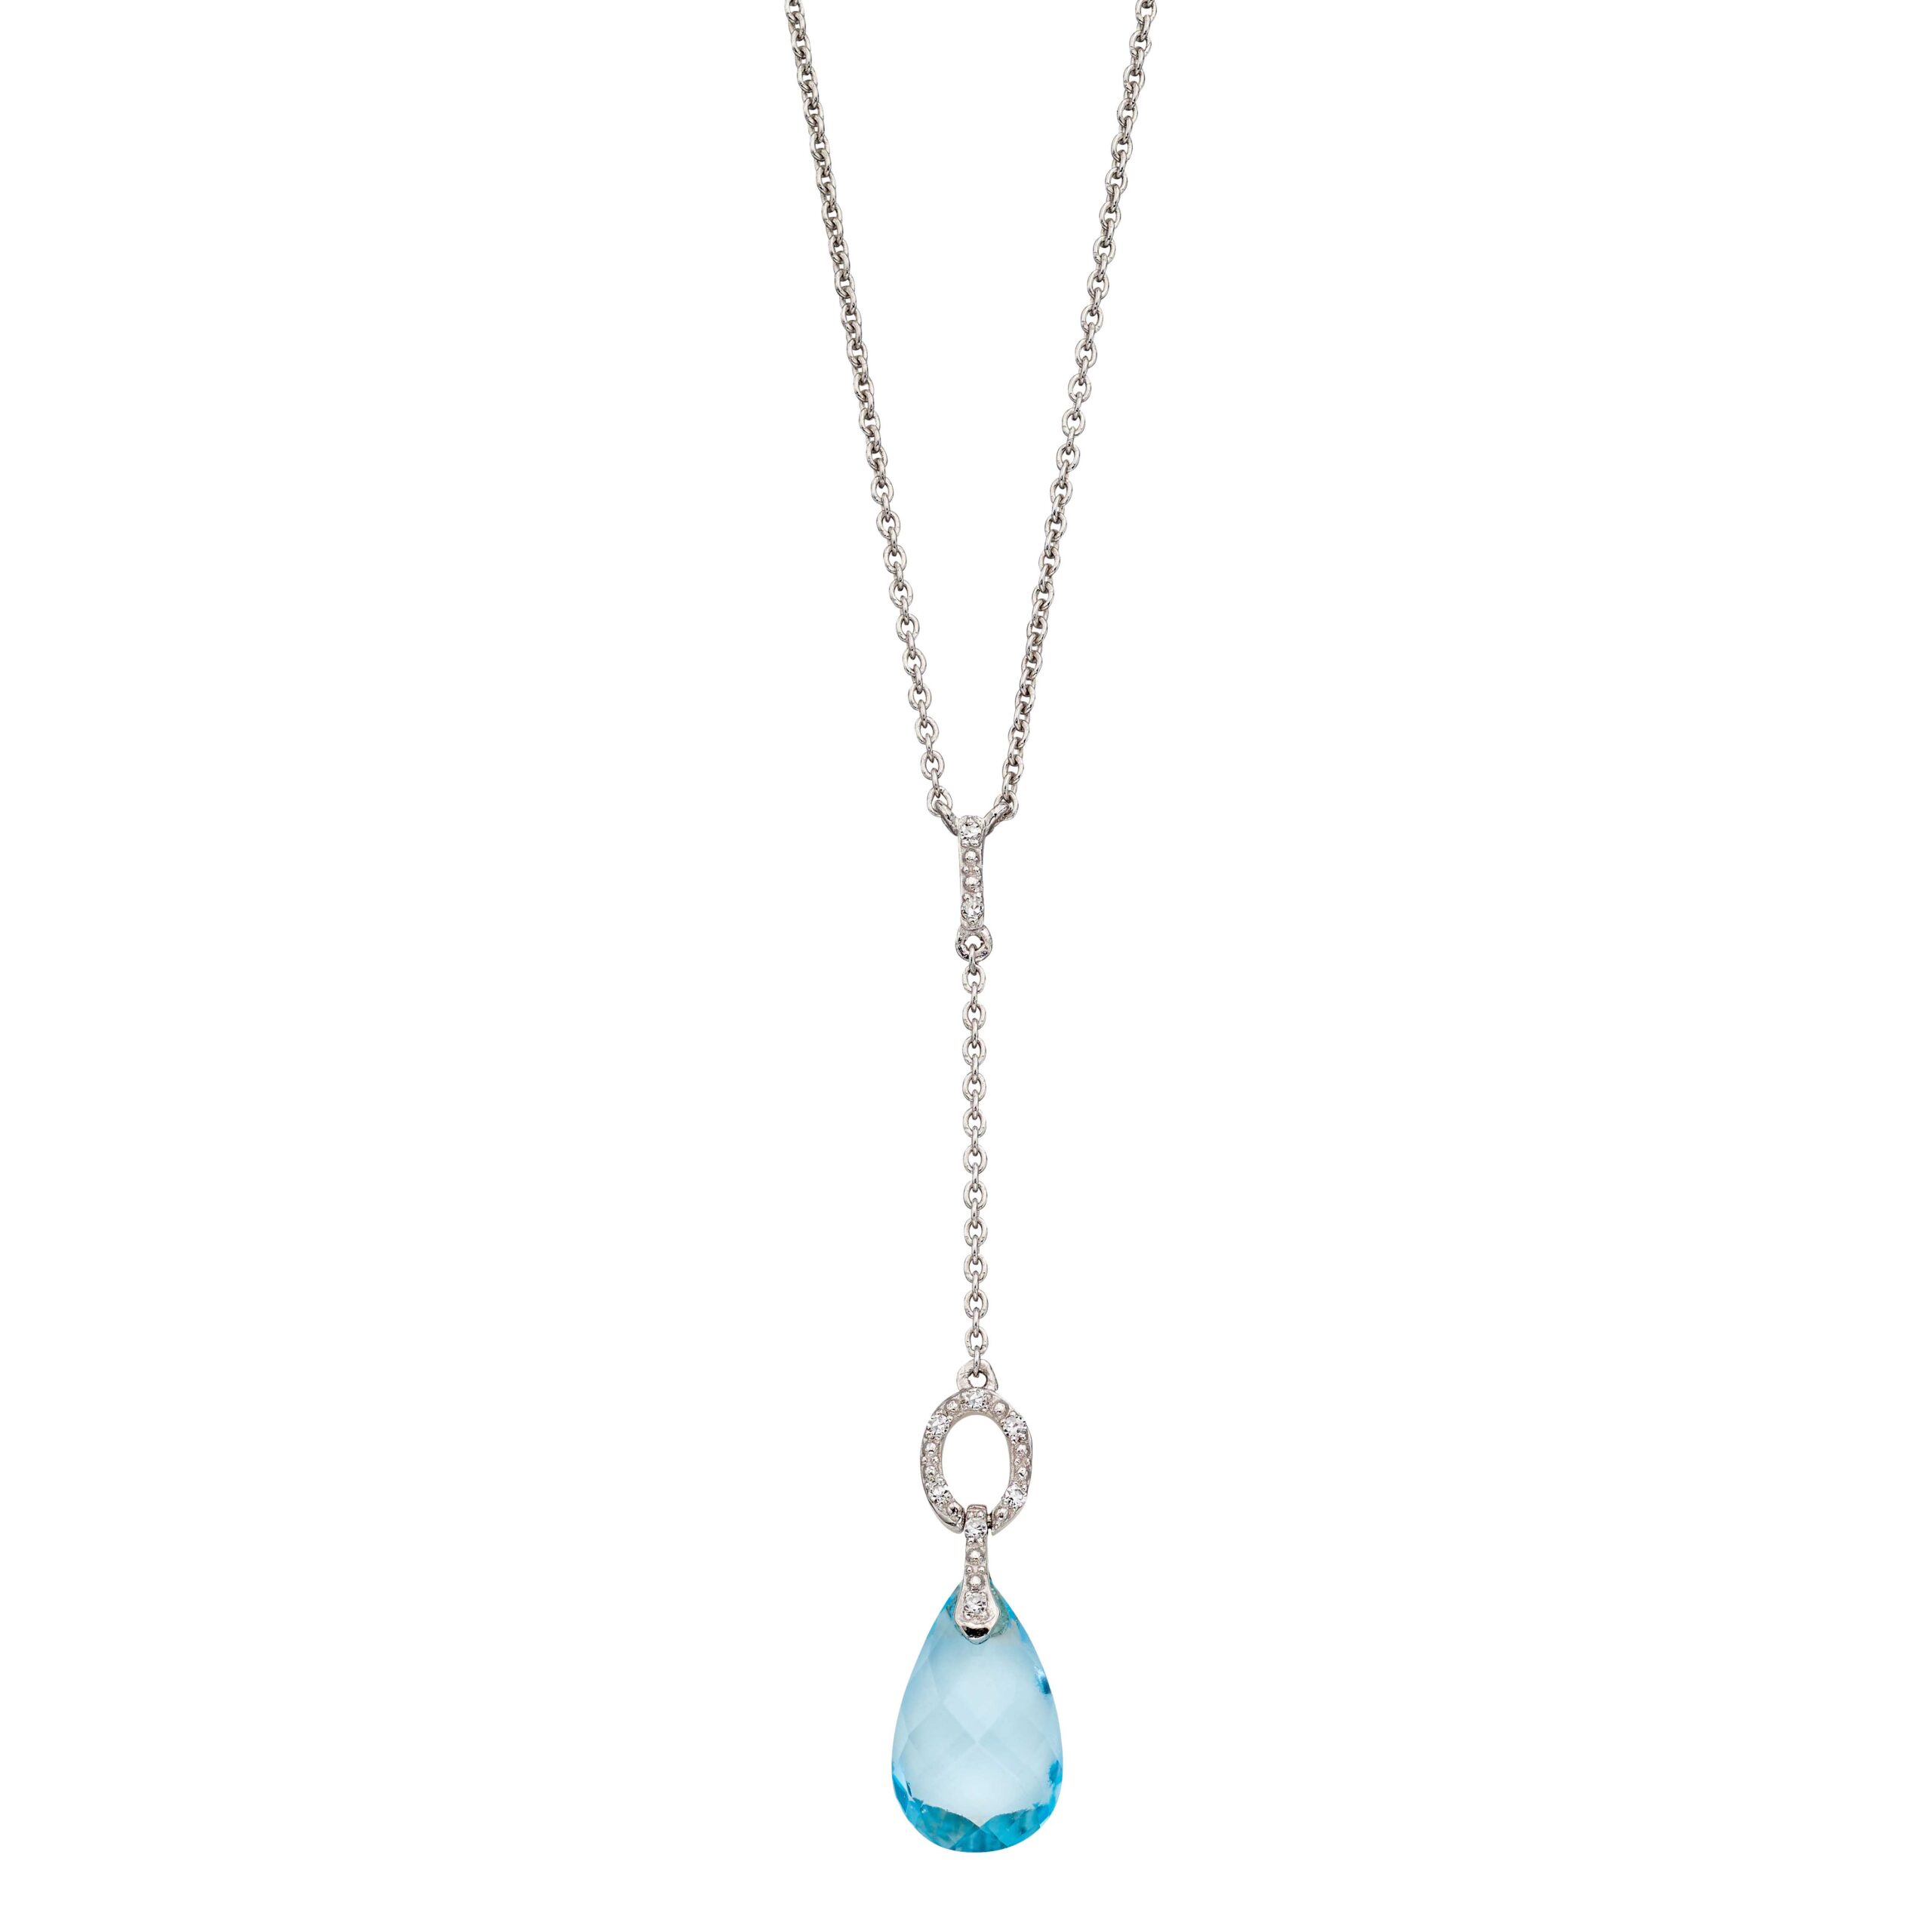 9ct white gold briolette topaz necklet on Sally Thorntons jewellery blog from AA Thornton Kettering Northampton 